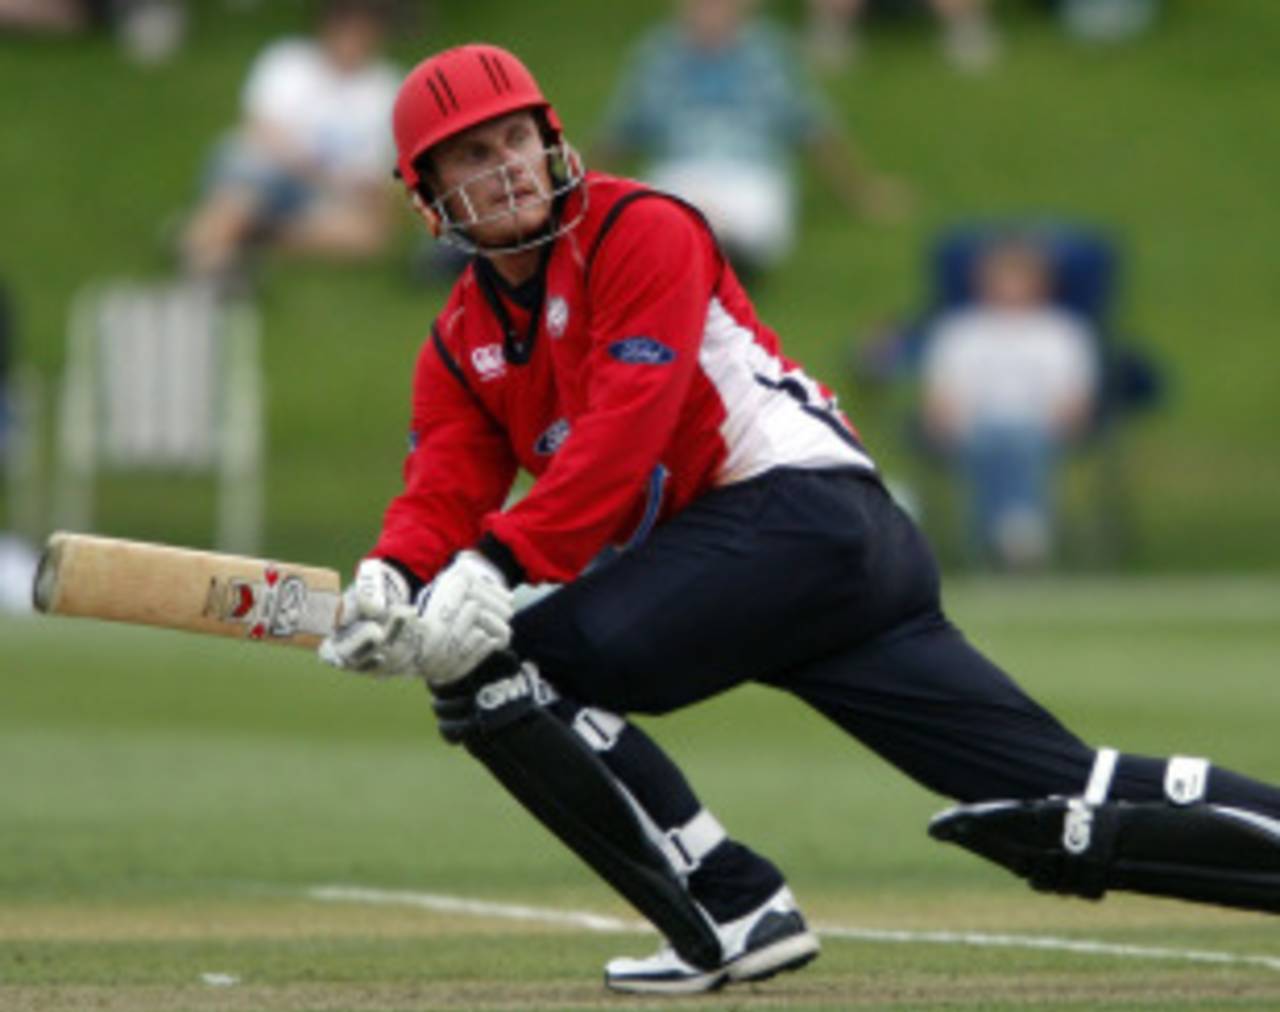 Rob Nicol top-scored for Canterbury with a blistering 85&nbsp;&nbsp;&bull;&nbsp;&nbsp;Getty Images